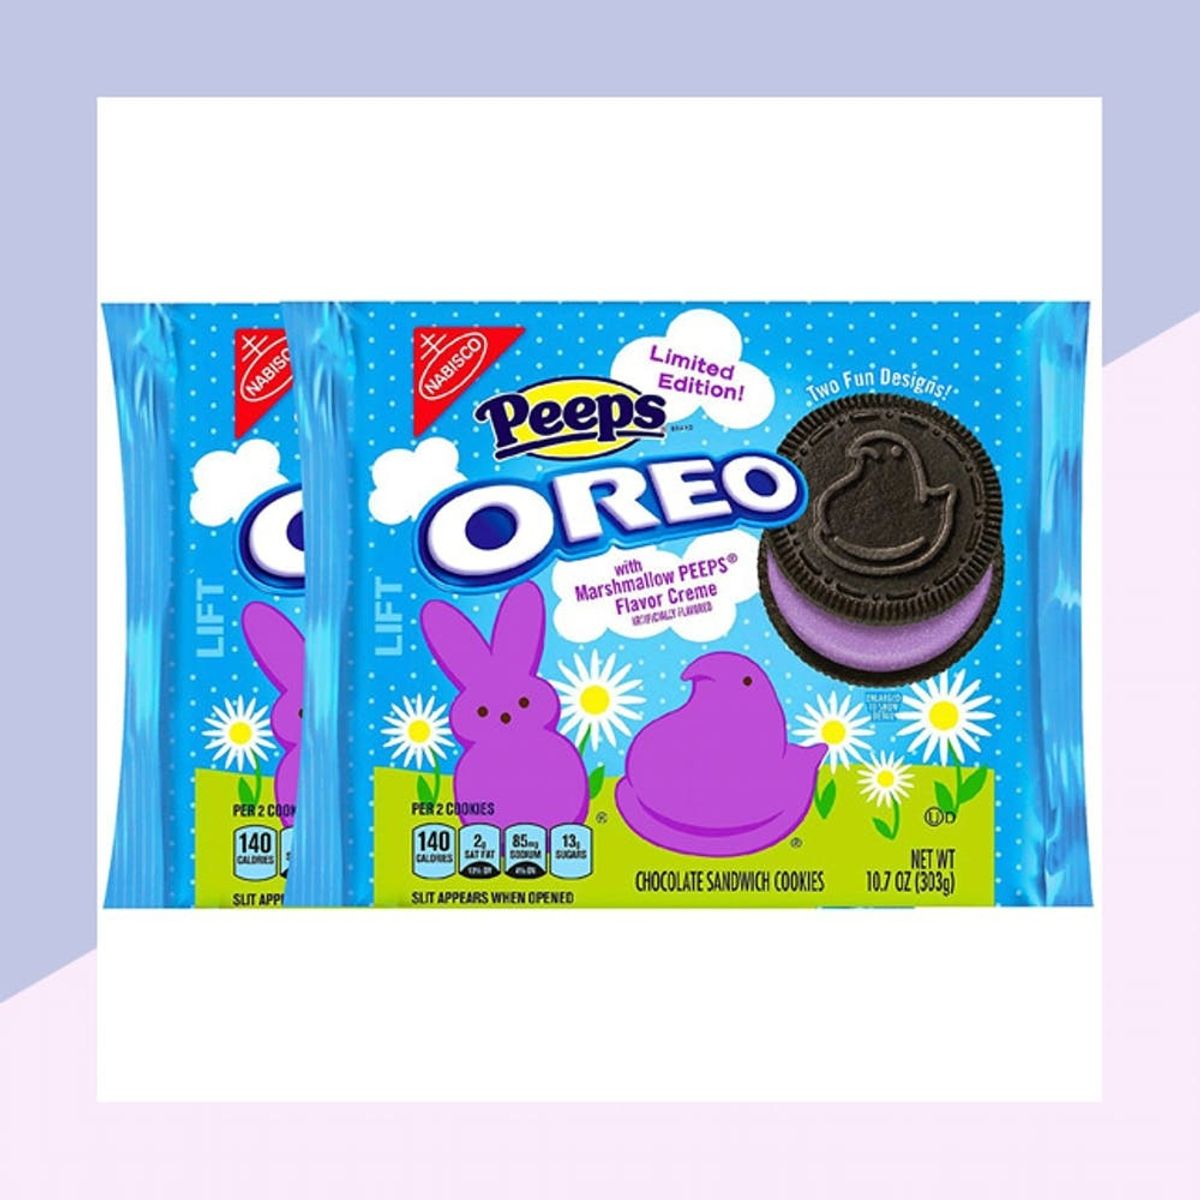 Peeps Oreos Have Returned for 2018 With 2 MAJOR Differences